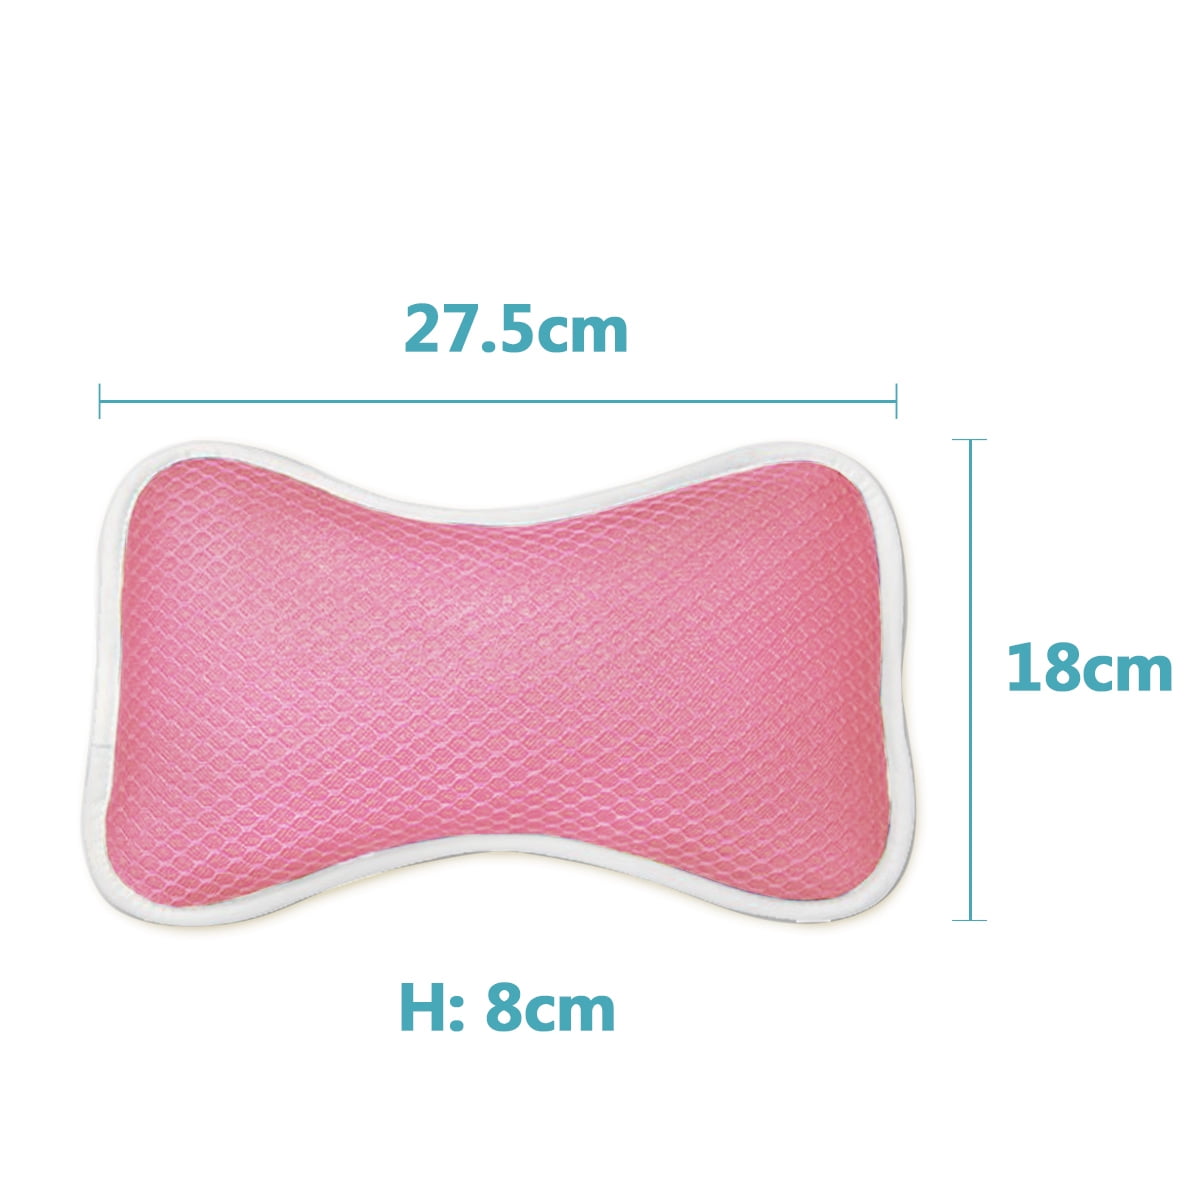 Samplife Bath Pillow Spa Bathtub Pillows Tub Cushion Head, Neck, Shoulder and Back Support Rest with 6 Nonslip Strong Suction Cups Home Bathing Relaxation 4D